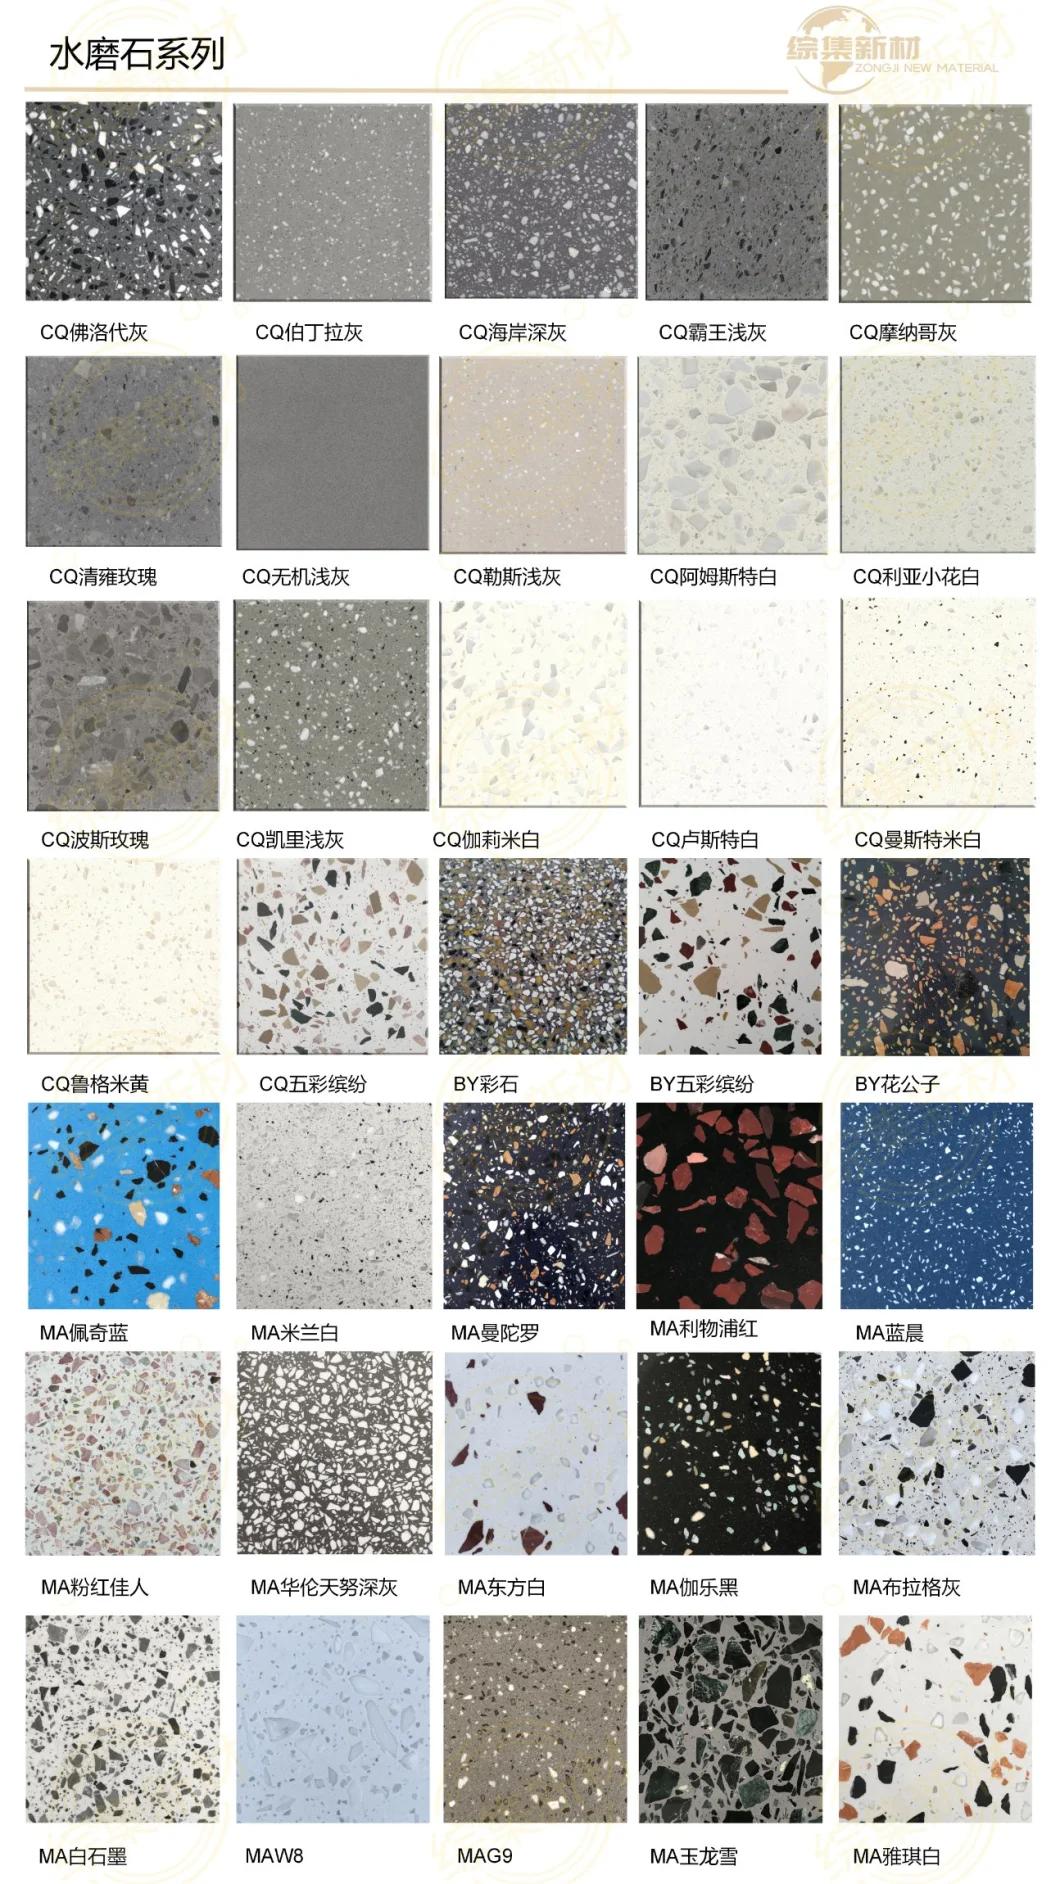 Artificial Stone Inorganic Colorful Terrazzo for Floor Wall Ceiling Decoration & Interior Furniture